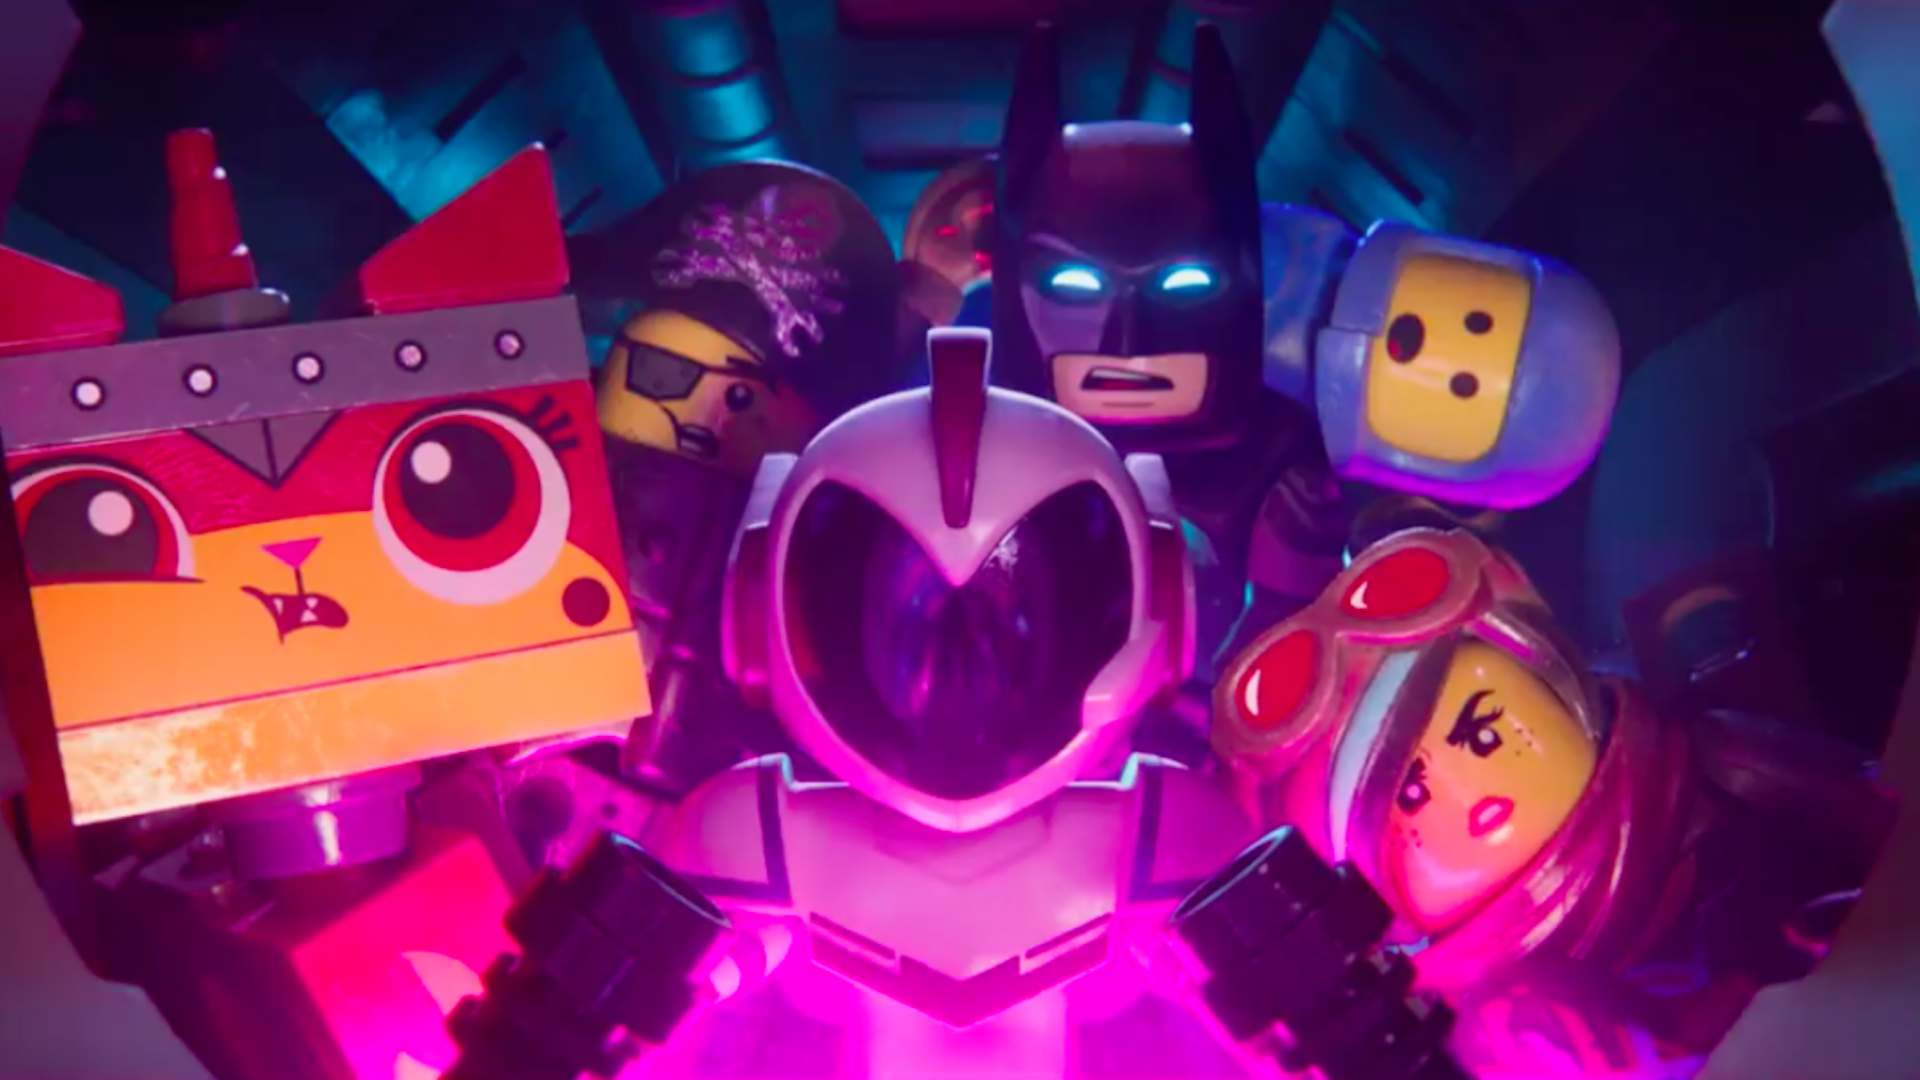 A scene from The Lego Movie 2: The Second Part